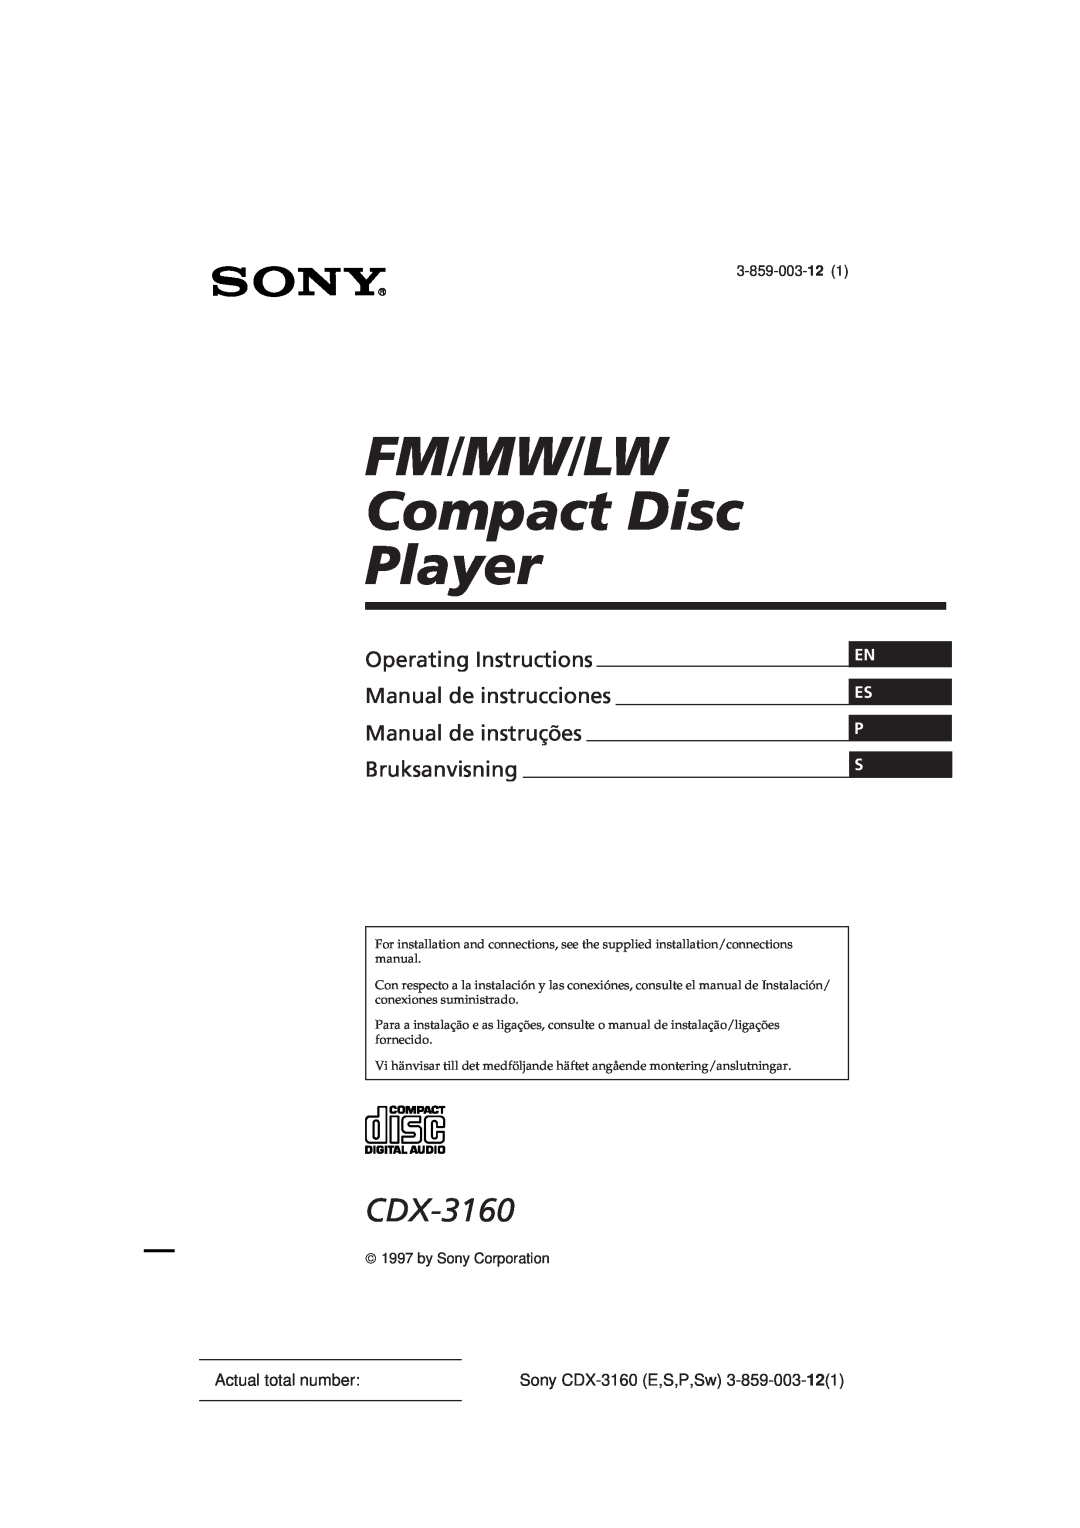 Sony manual En Es P S, Actual total number, 3-859-003-12, by Sony Corporation, Sony CDX-3160E,S,P,Sw 